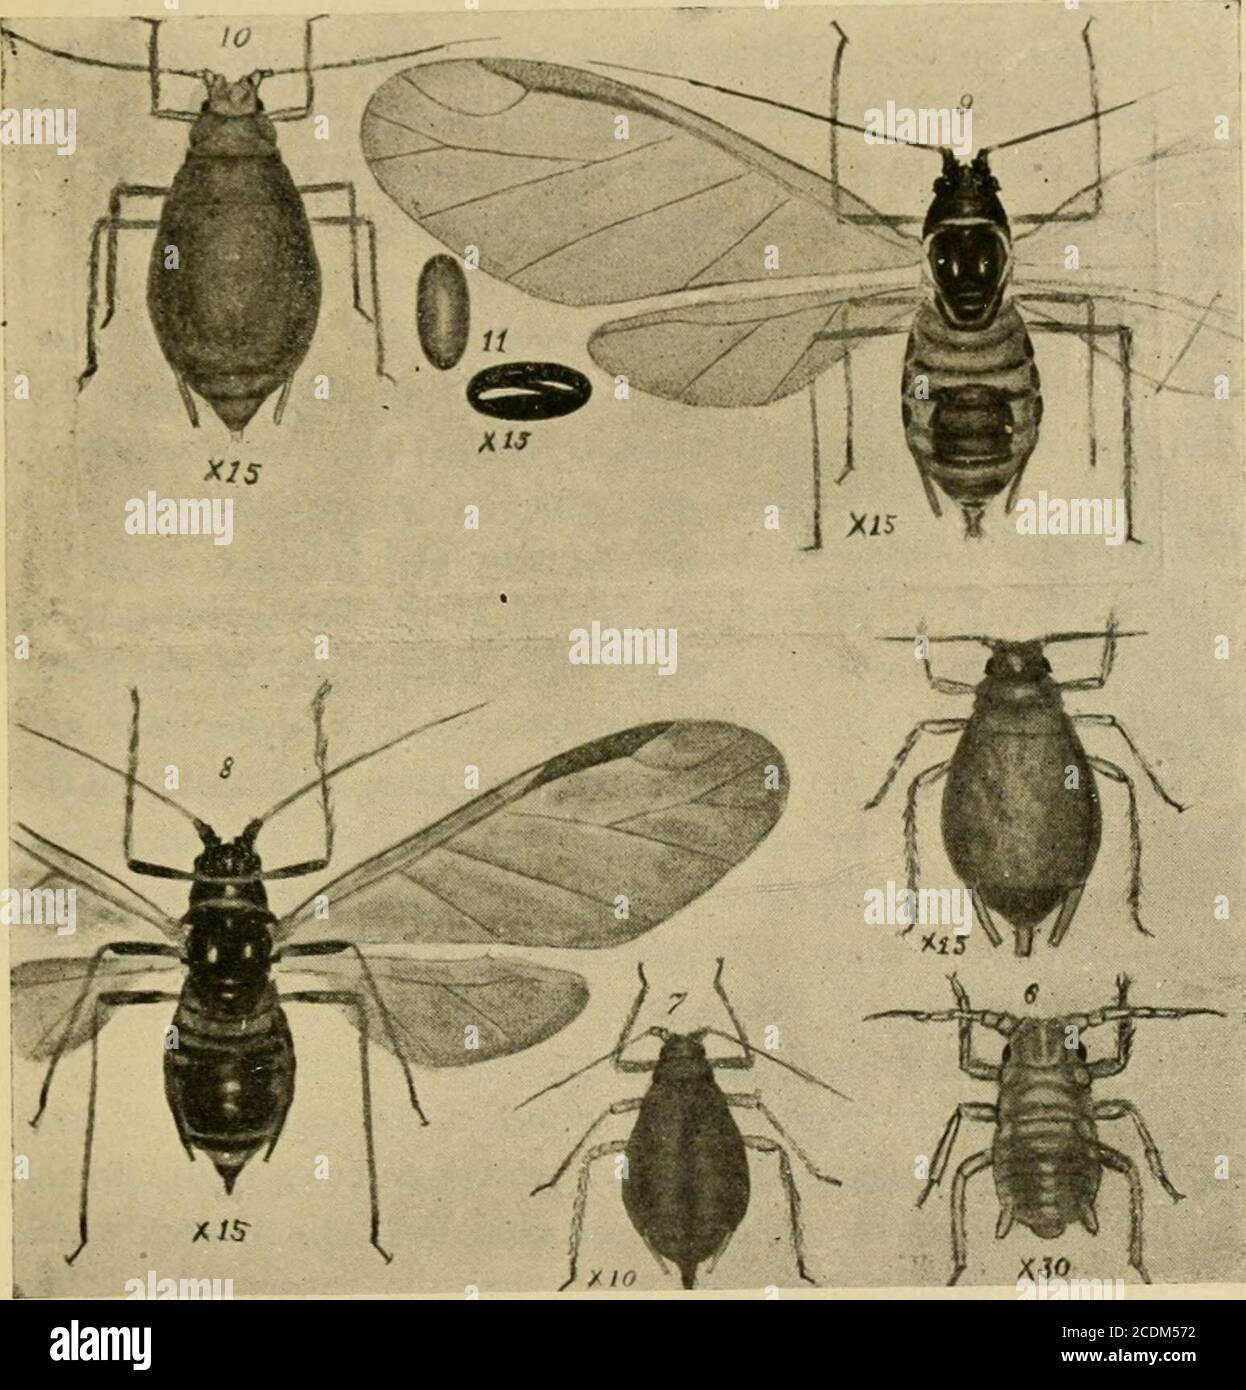 . Insect pests of farm, garden and orchard . of winter, as in cabbage pits, or in the South.The small, oval, shining black eggs are deposited in the axils ofthe buds or in crevices of the bark. ! The eggs hatch veryearly in the spring so that the young stem-mothers from themare often almost fully grown before the earliest peach or plumblossoms open. About the time the buds begin to open on thesetrees, the stem-mothers are all of a deep pink color and begin to * Myzus persicoe Sulz. Family Aphididoe. (Syn.—Rhopalosiphum diantJiiSchr.) See Gillette and Taylor, Bulletin 133, Colo. Agr. Exp. Sta., Stock Photo